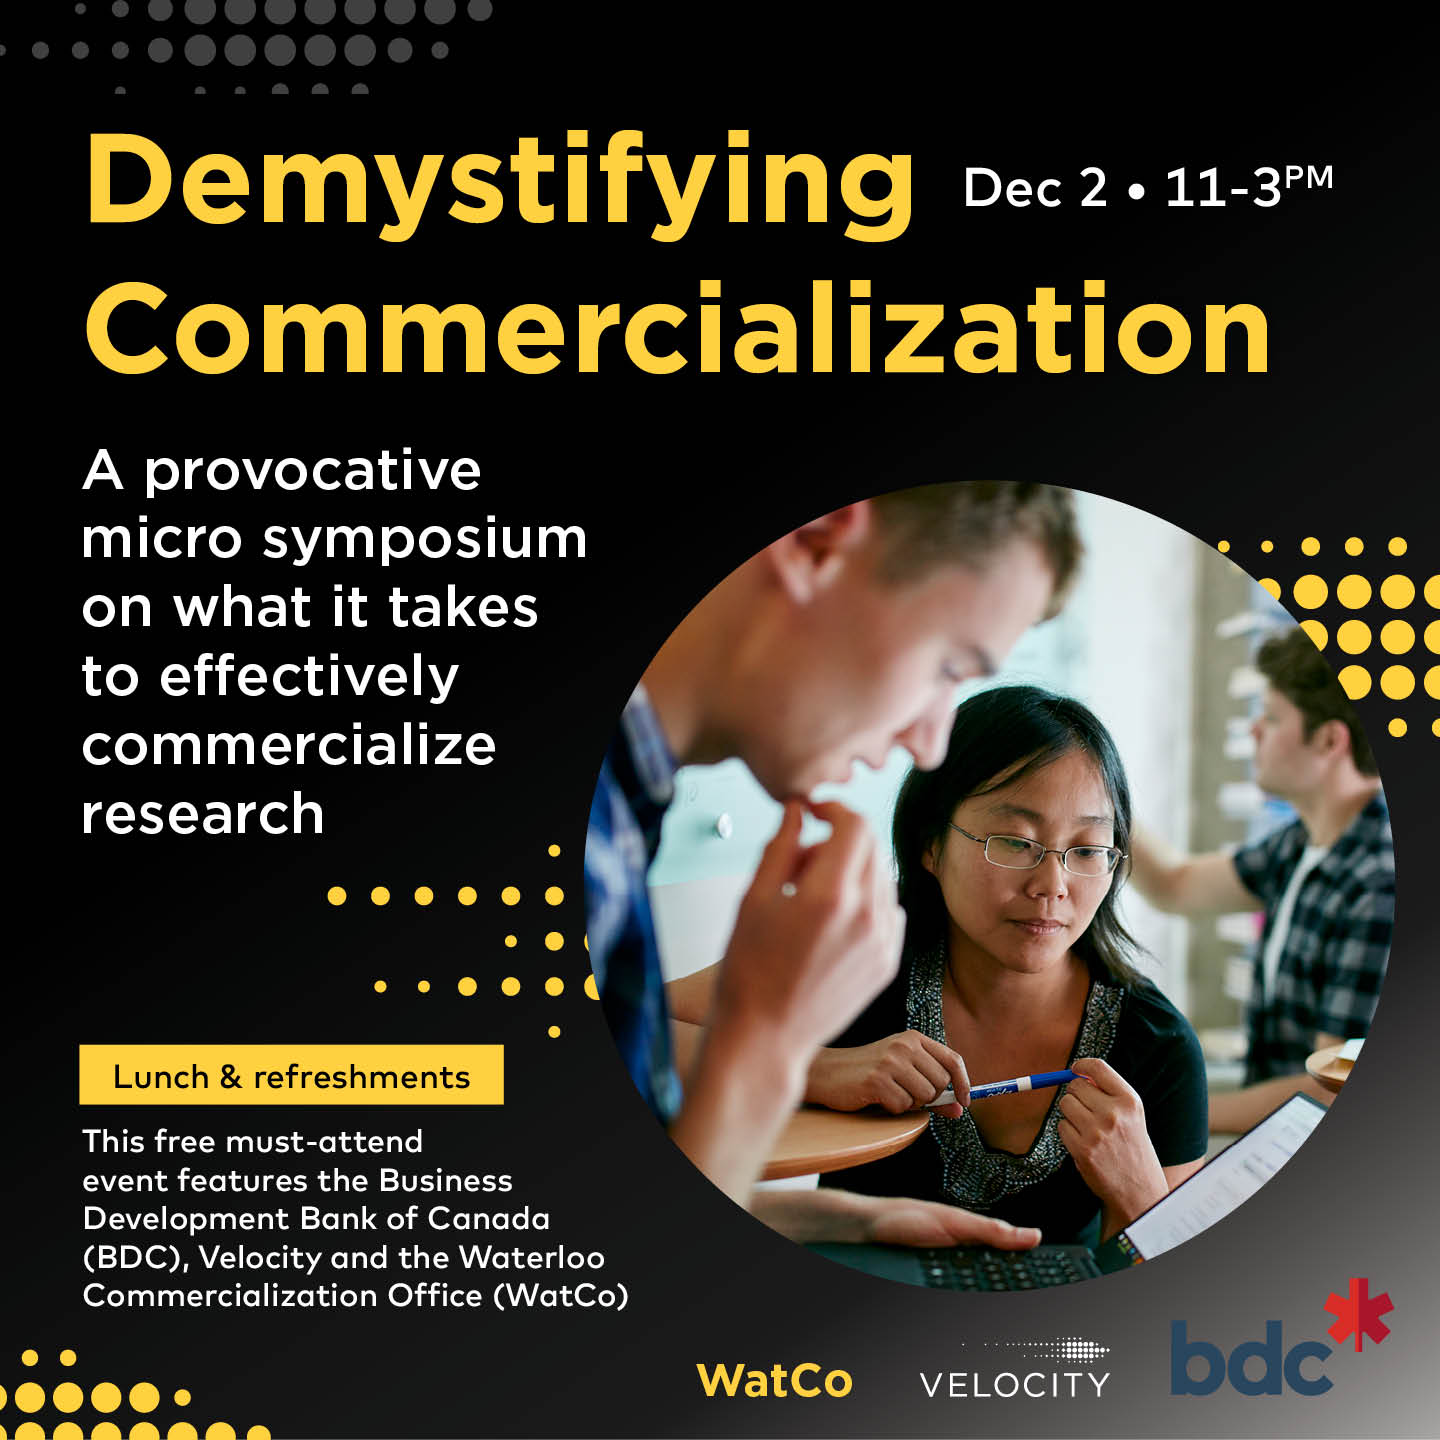 Poster for the demystifying commercialization event